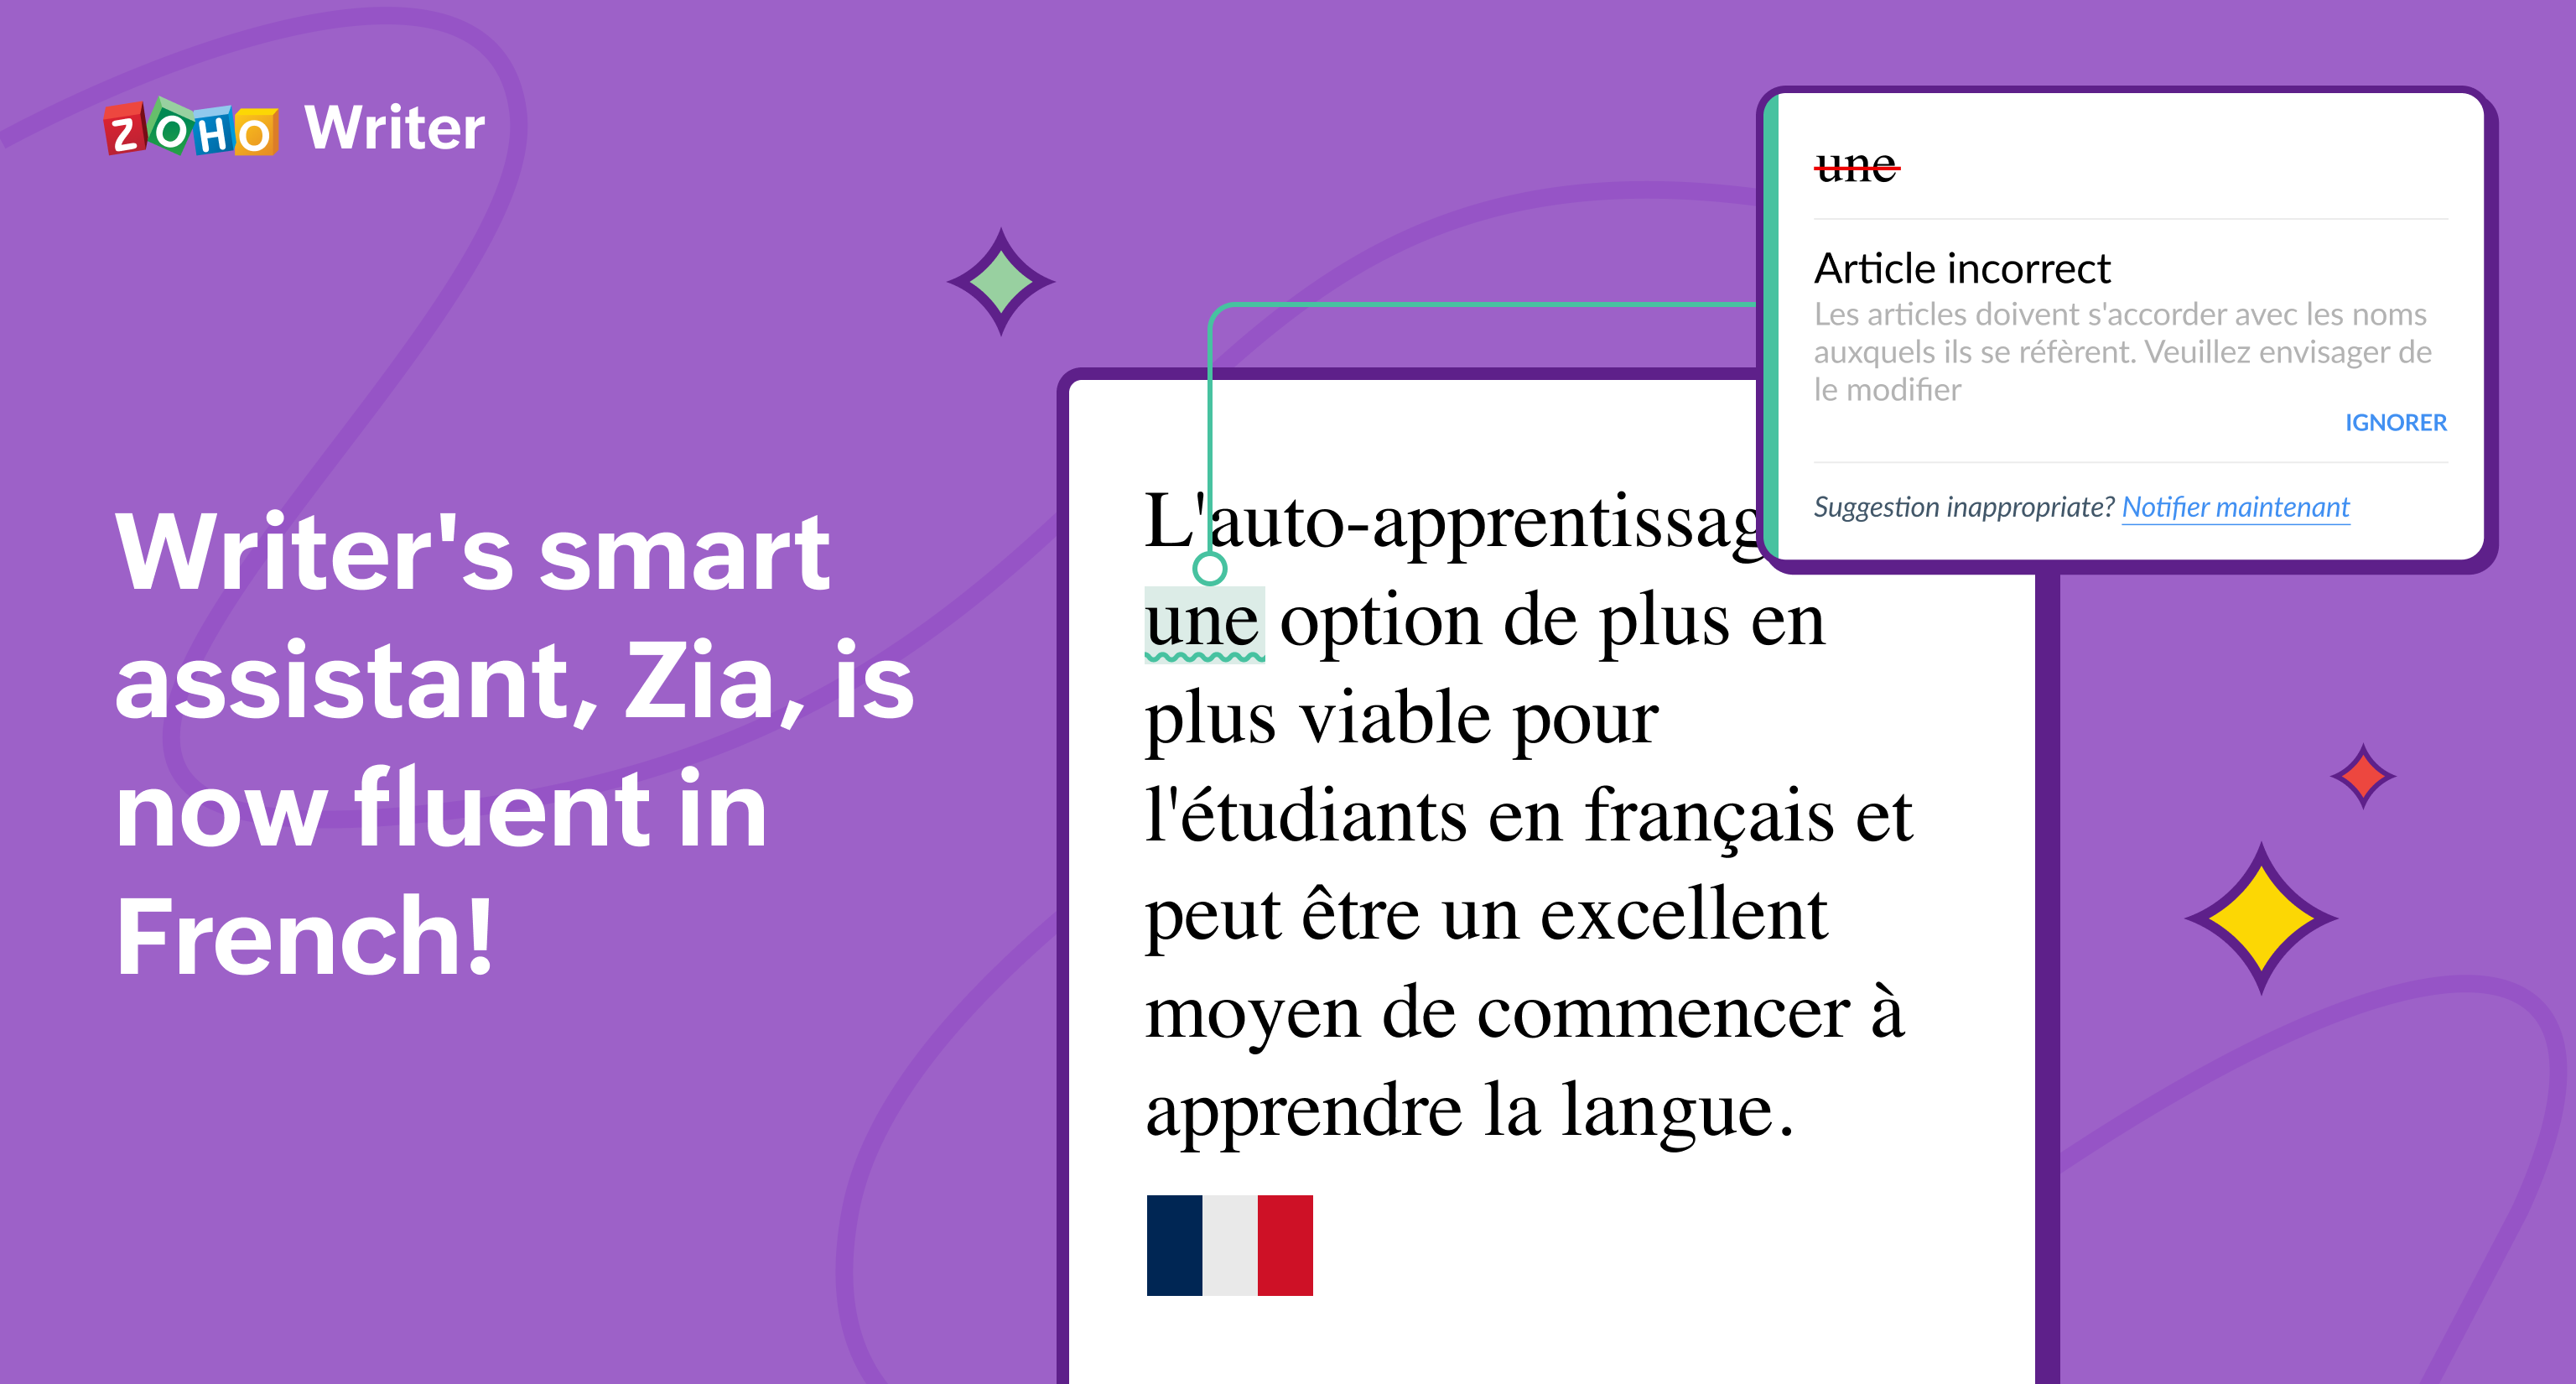 Writer's smart assistant, Zia, is now fluent in French!